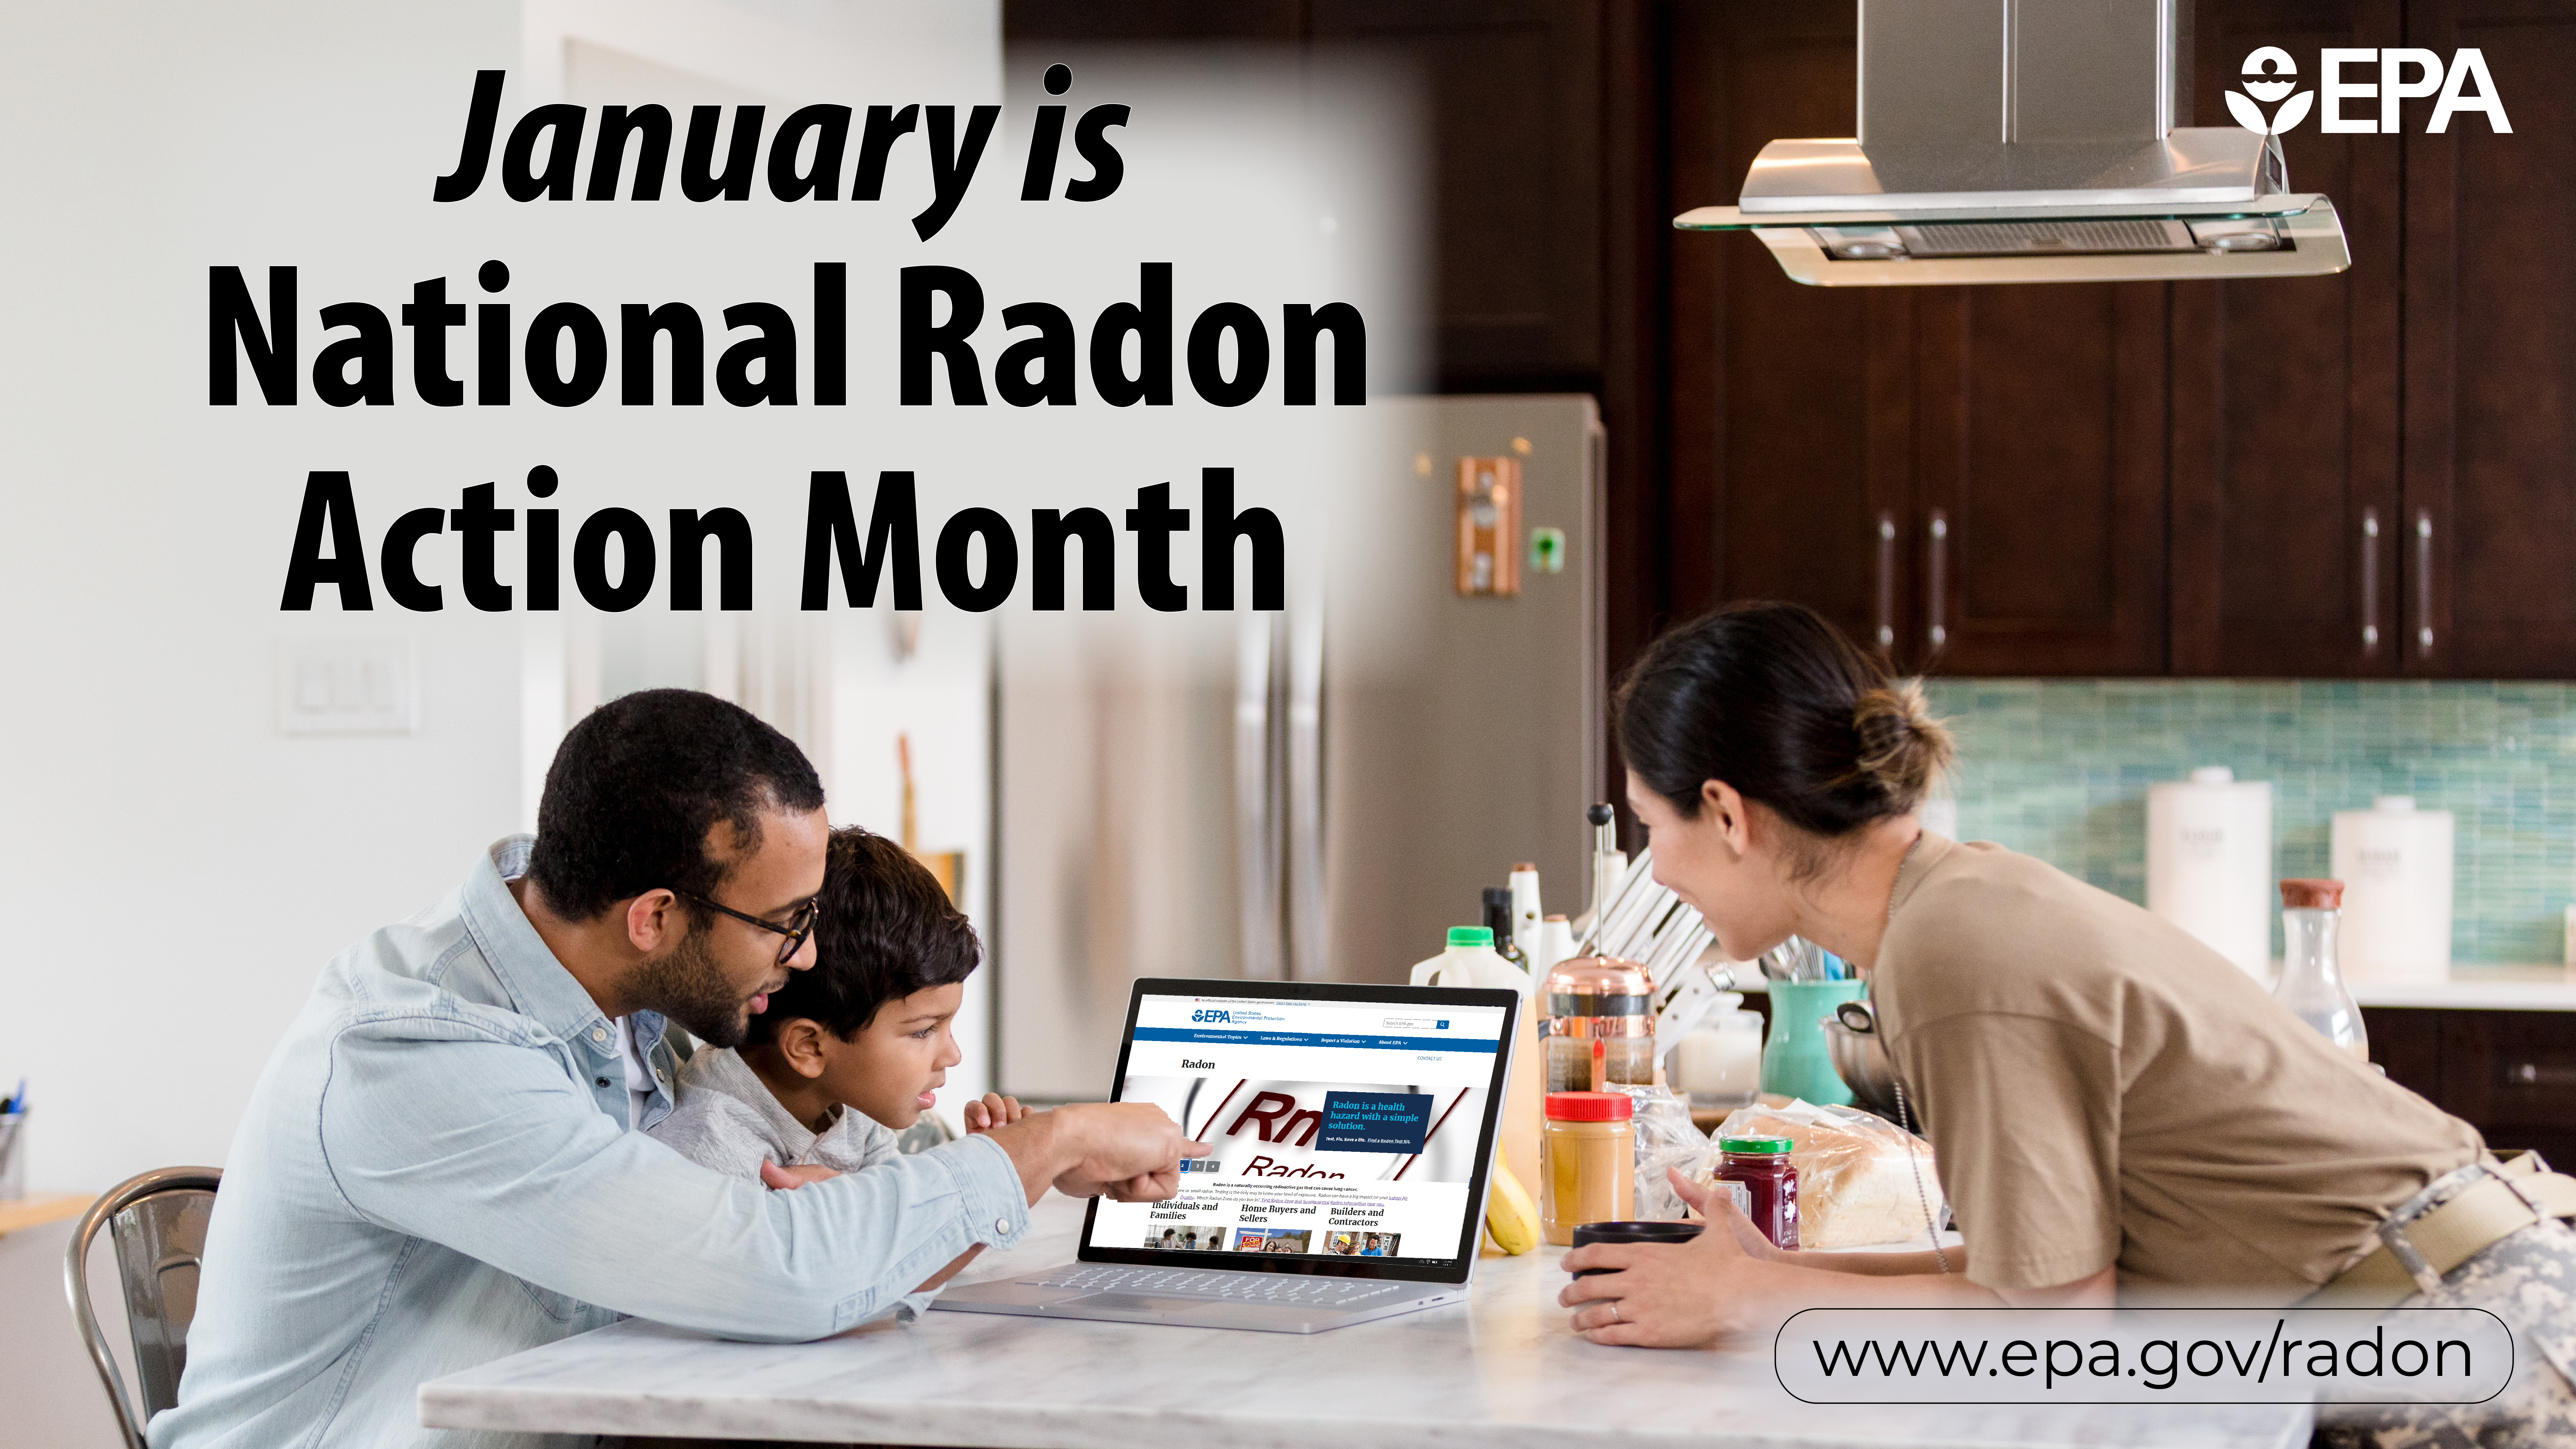 PHS News Release - January is National Radon Awareness Month